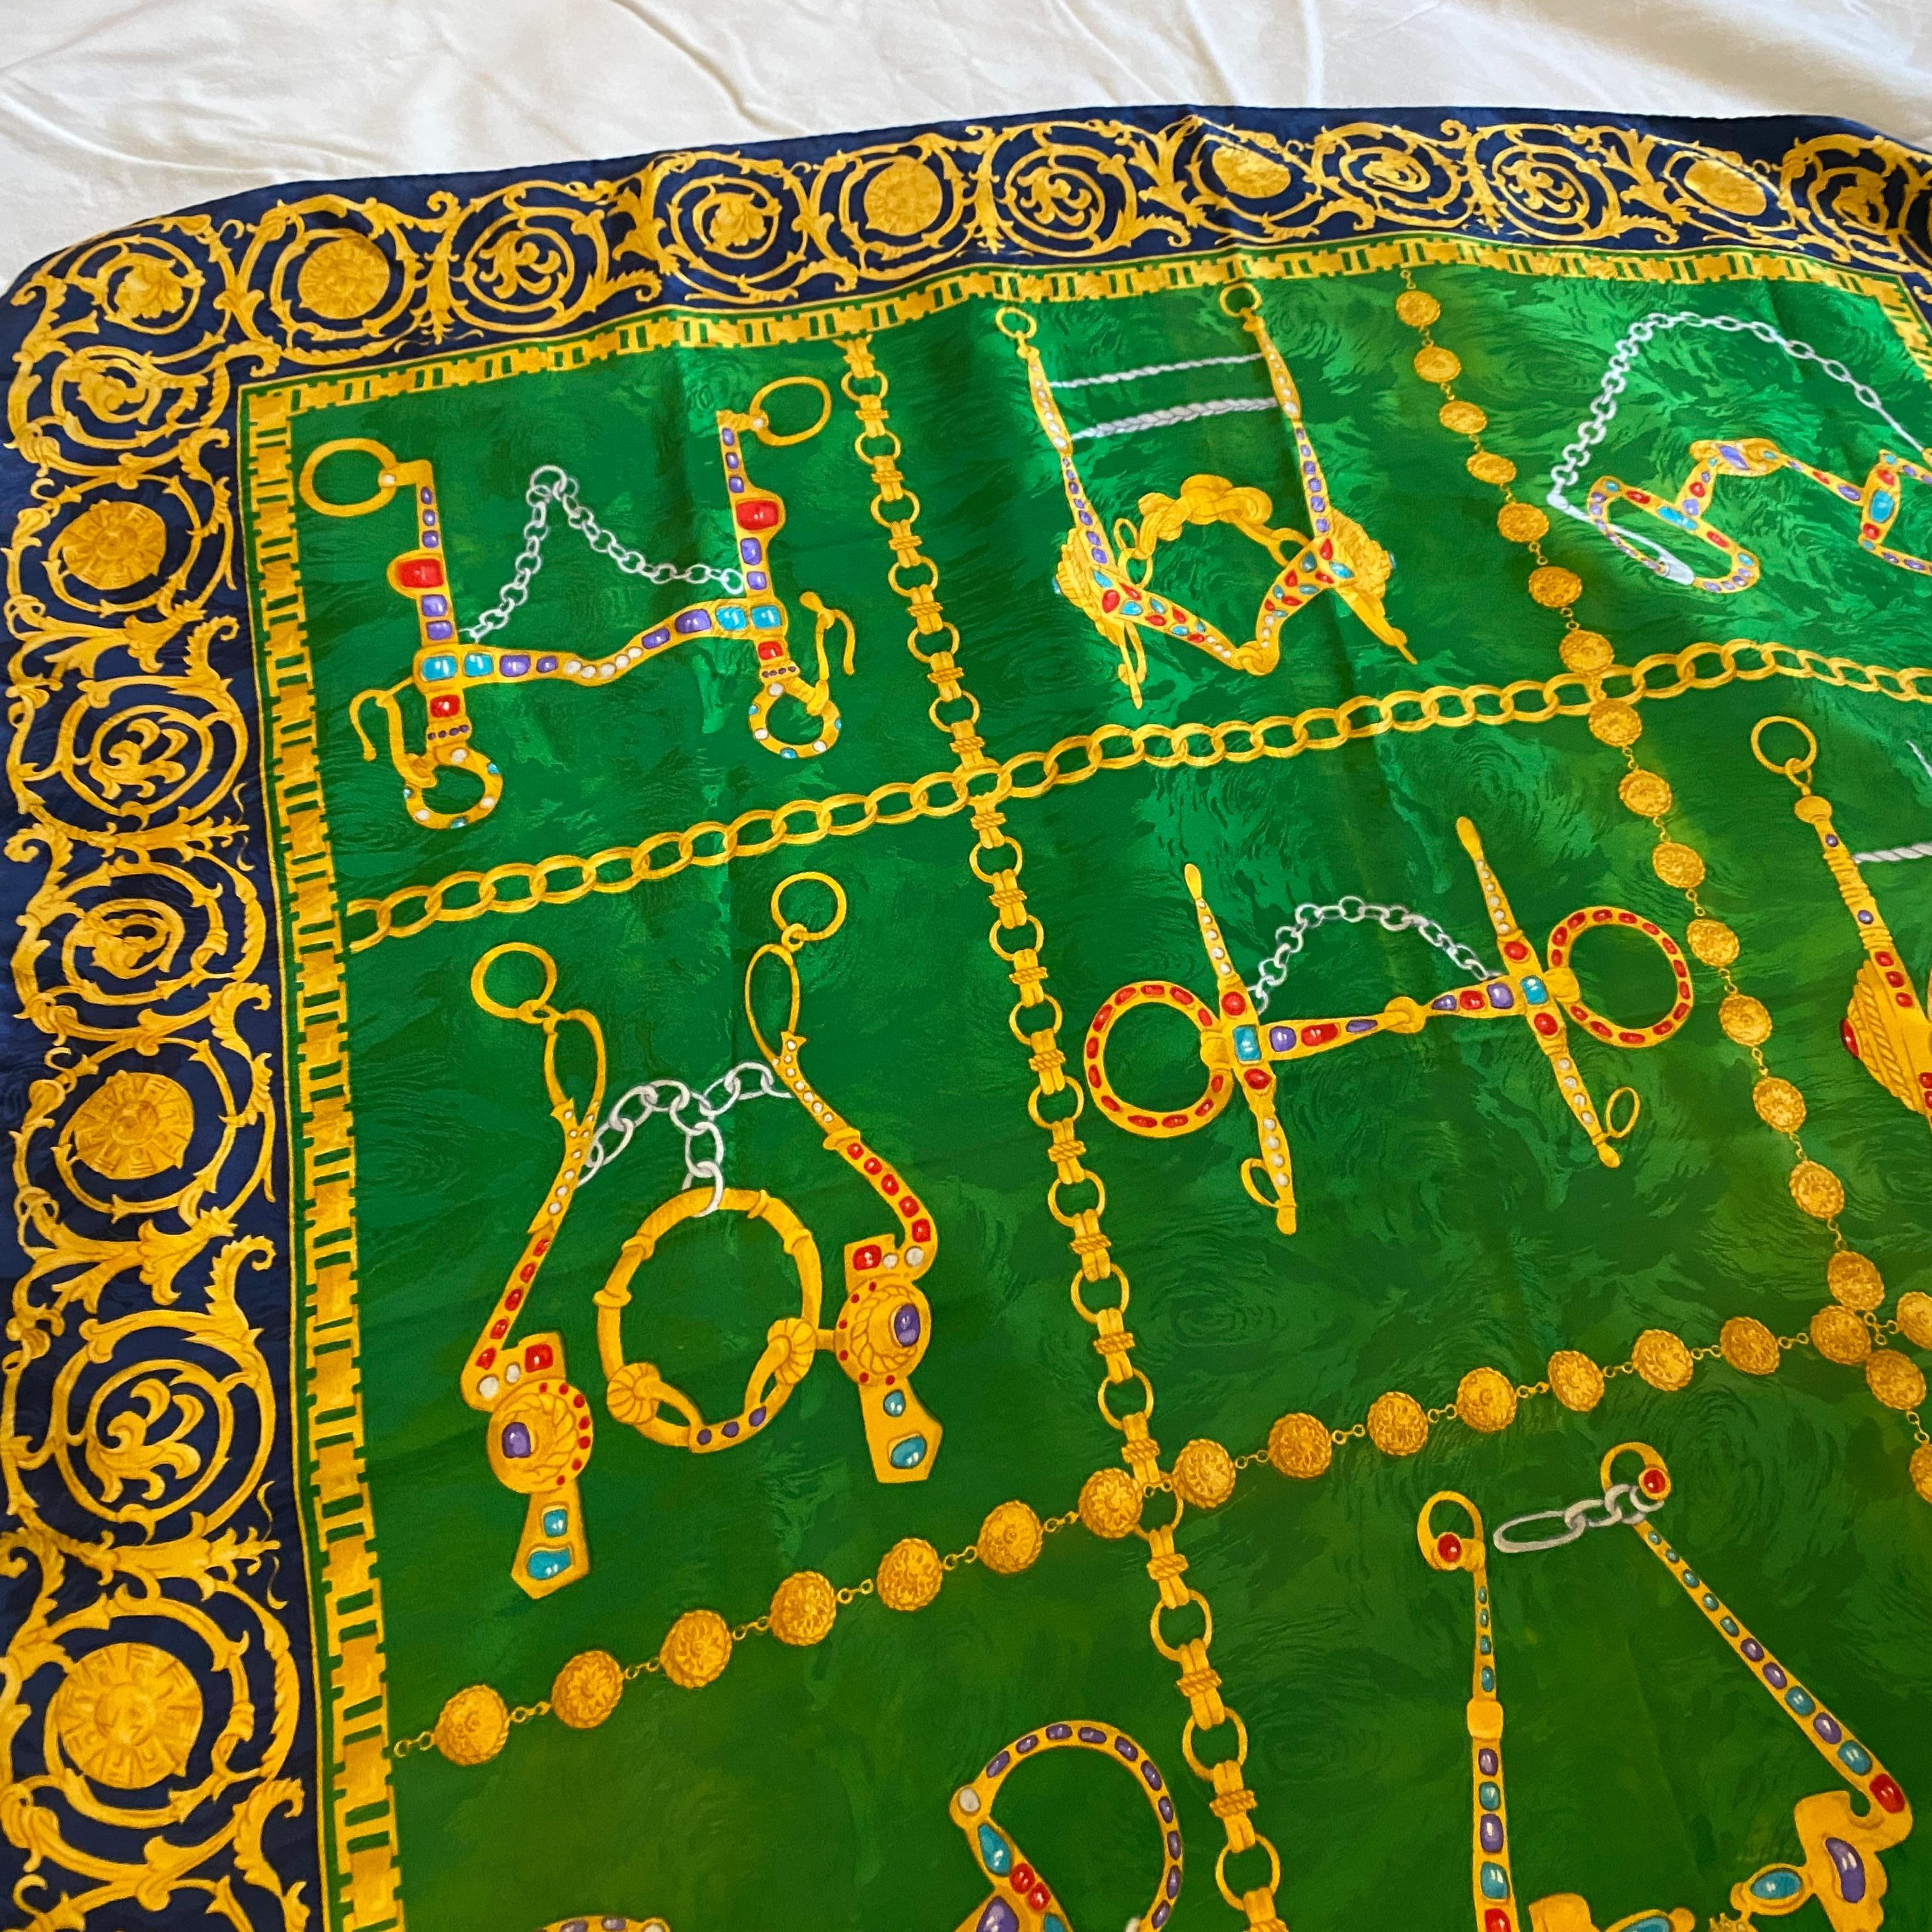 1980s Vintage Silk Color Italian Scarf Foulard by Renato Balestra For Sale 6